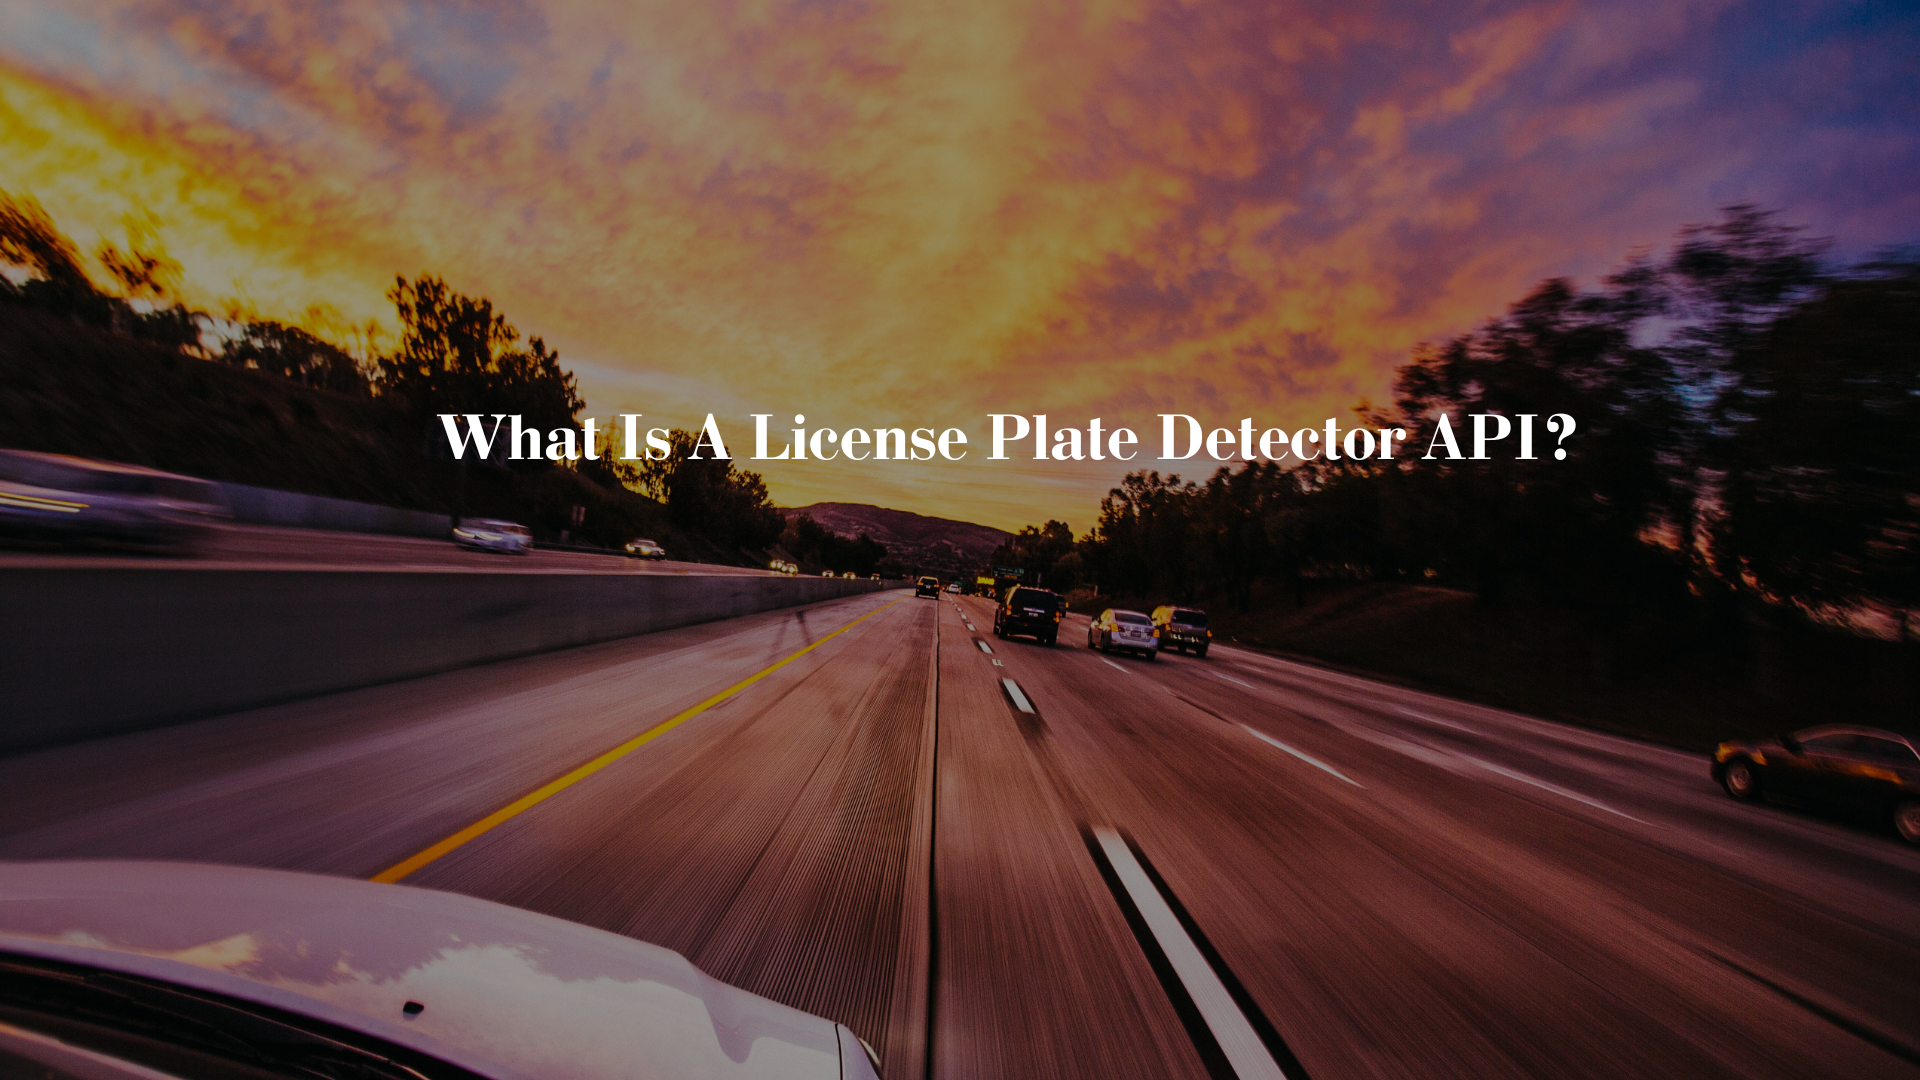 What Is A License Plate Detector API?